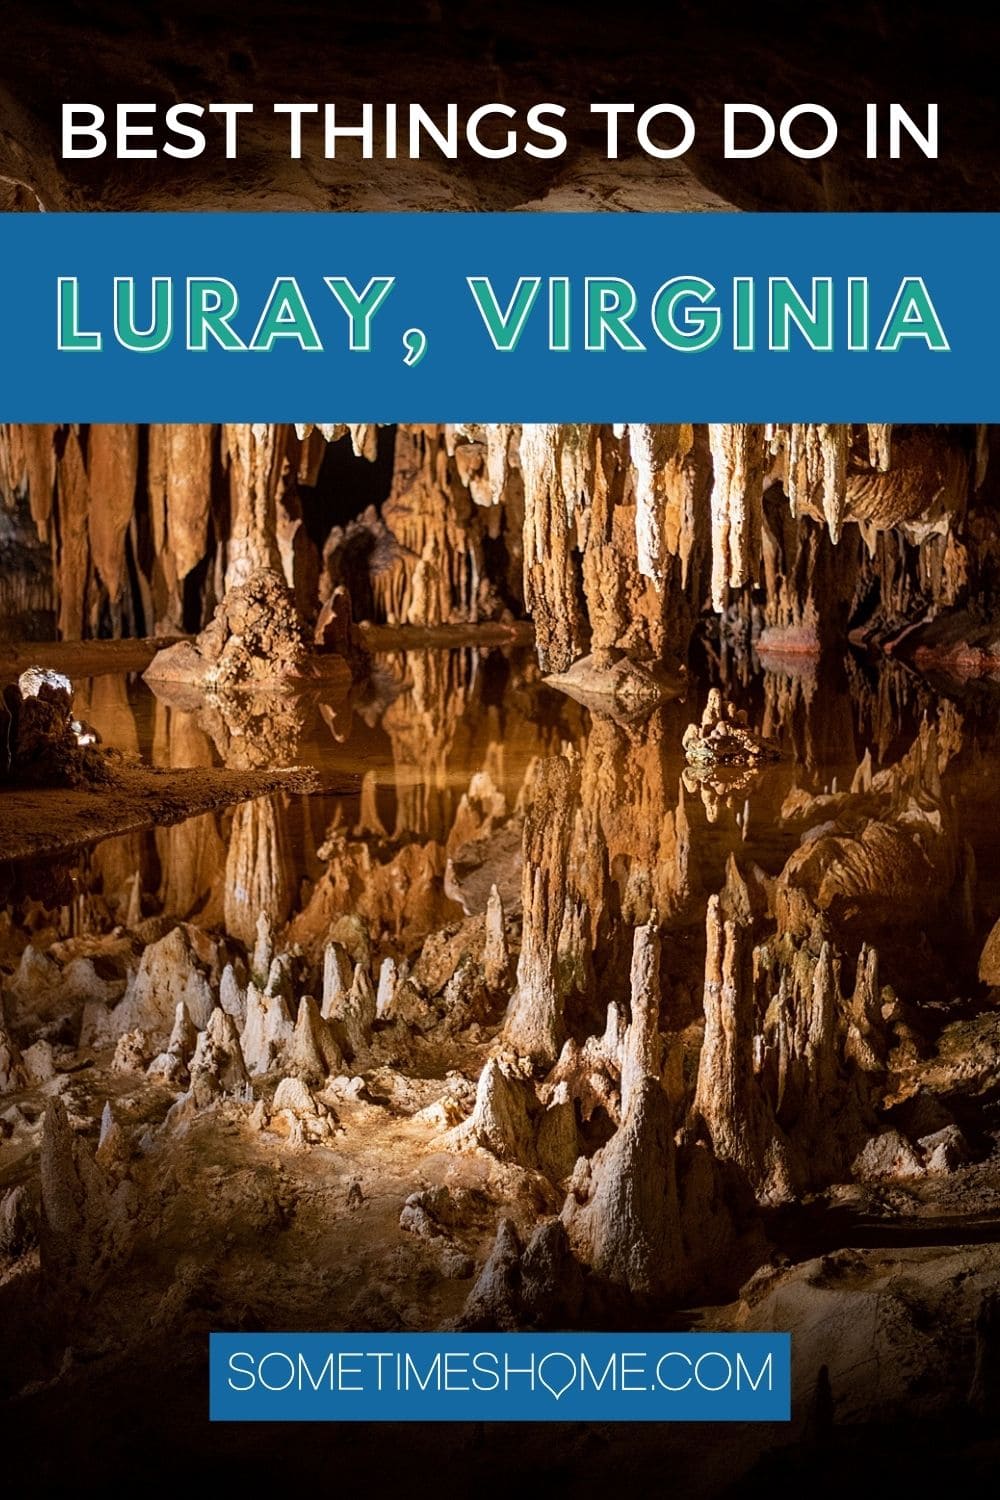 Best things to do in Luray, Virginia with a photo of the famous Luray Caverns.